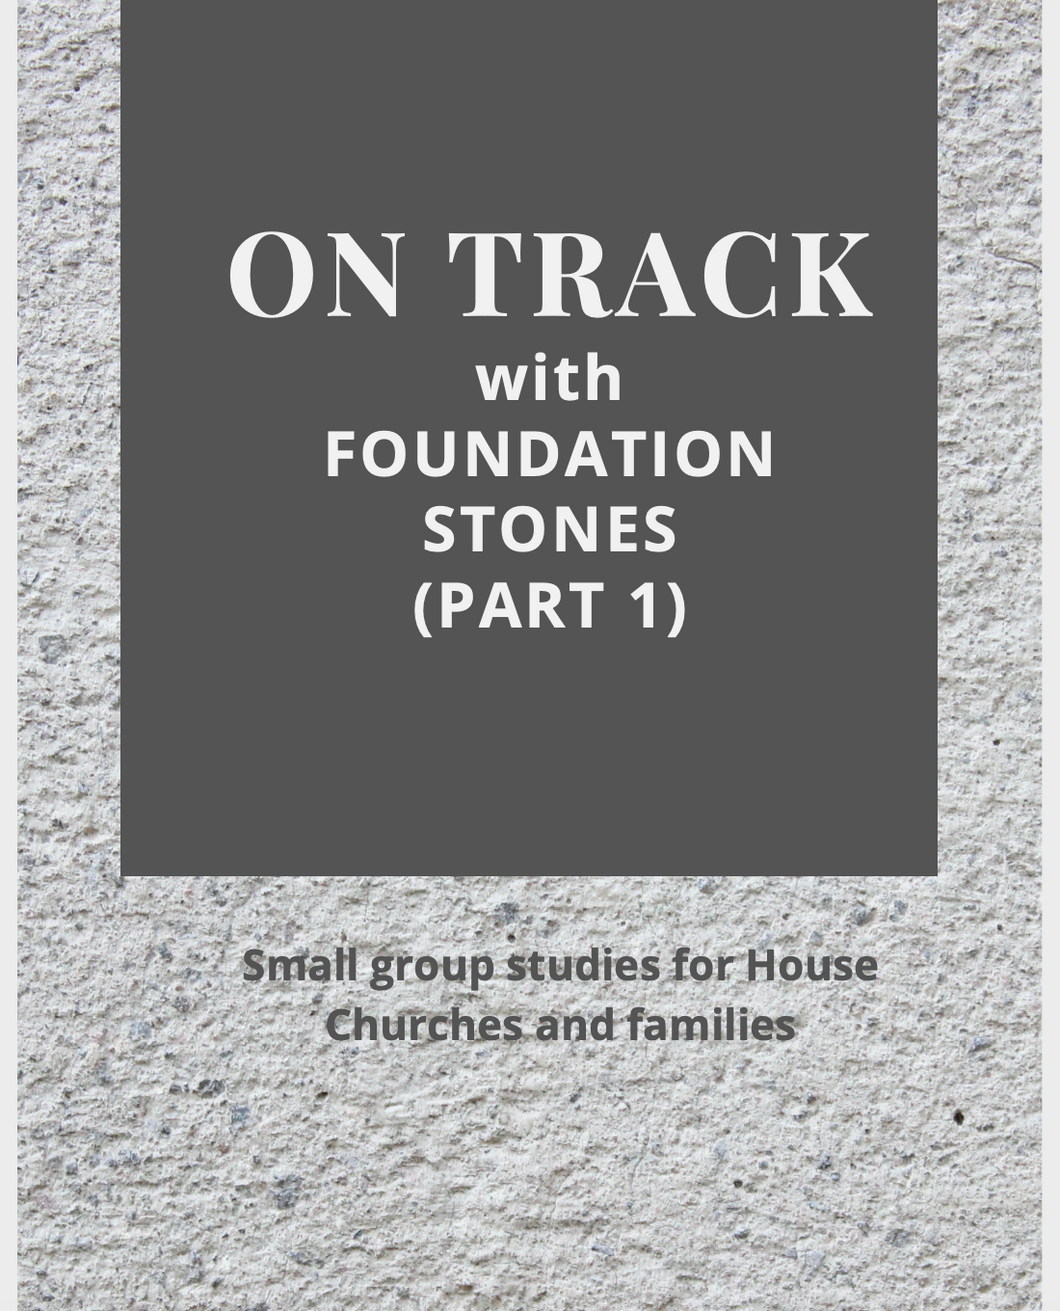 ON TRACK with Foundation Stones (Pt 1)